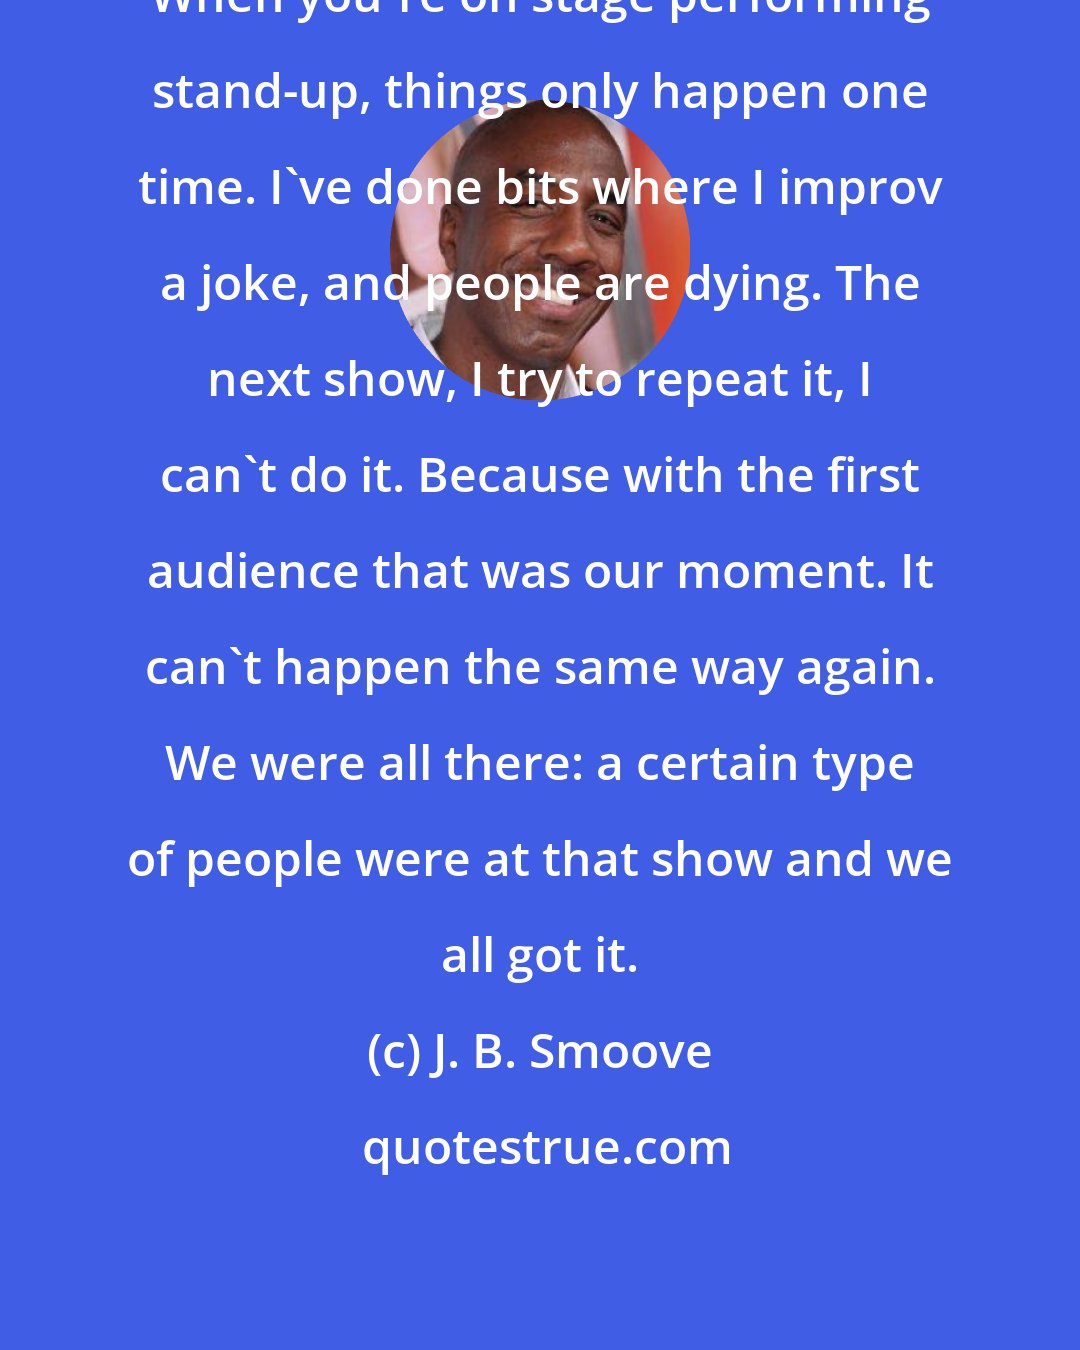 J. B. Smoove: When you're on stage performing stand-up, things only happen one time. I've done bits where I improv a joke, and people are dying. The next show, I try to repeat it, I can't do it. Because with the first audience that was our moment. It can't happen the same way again. We were all there: a certain type of people were at that show and we all got it.